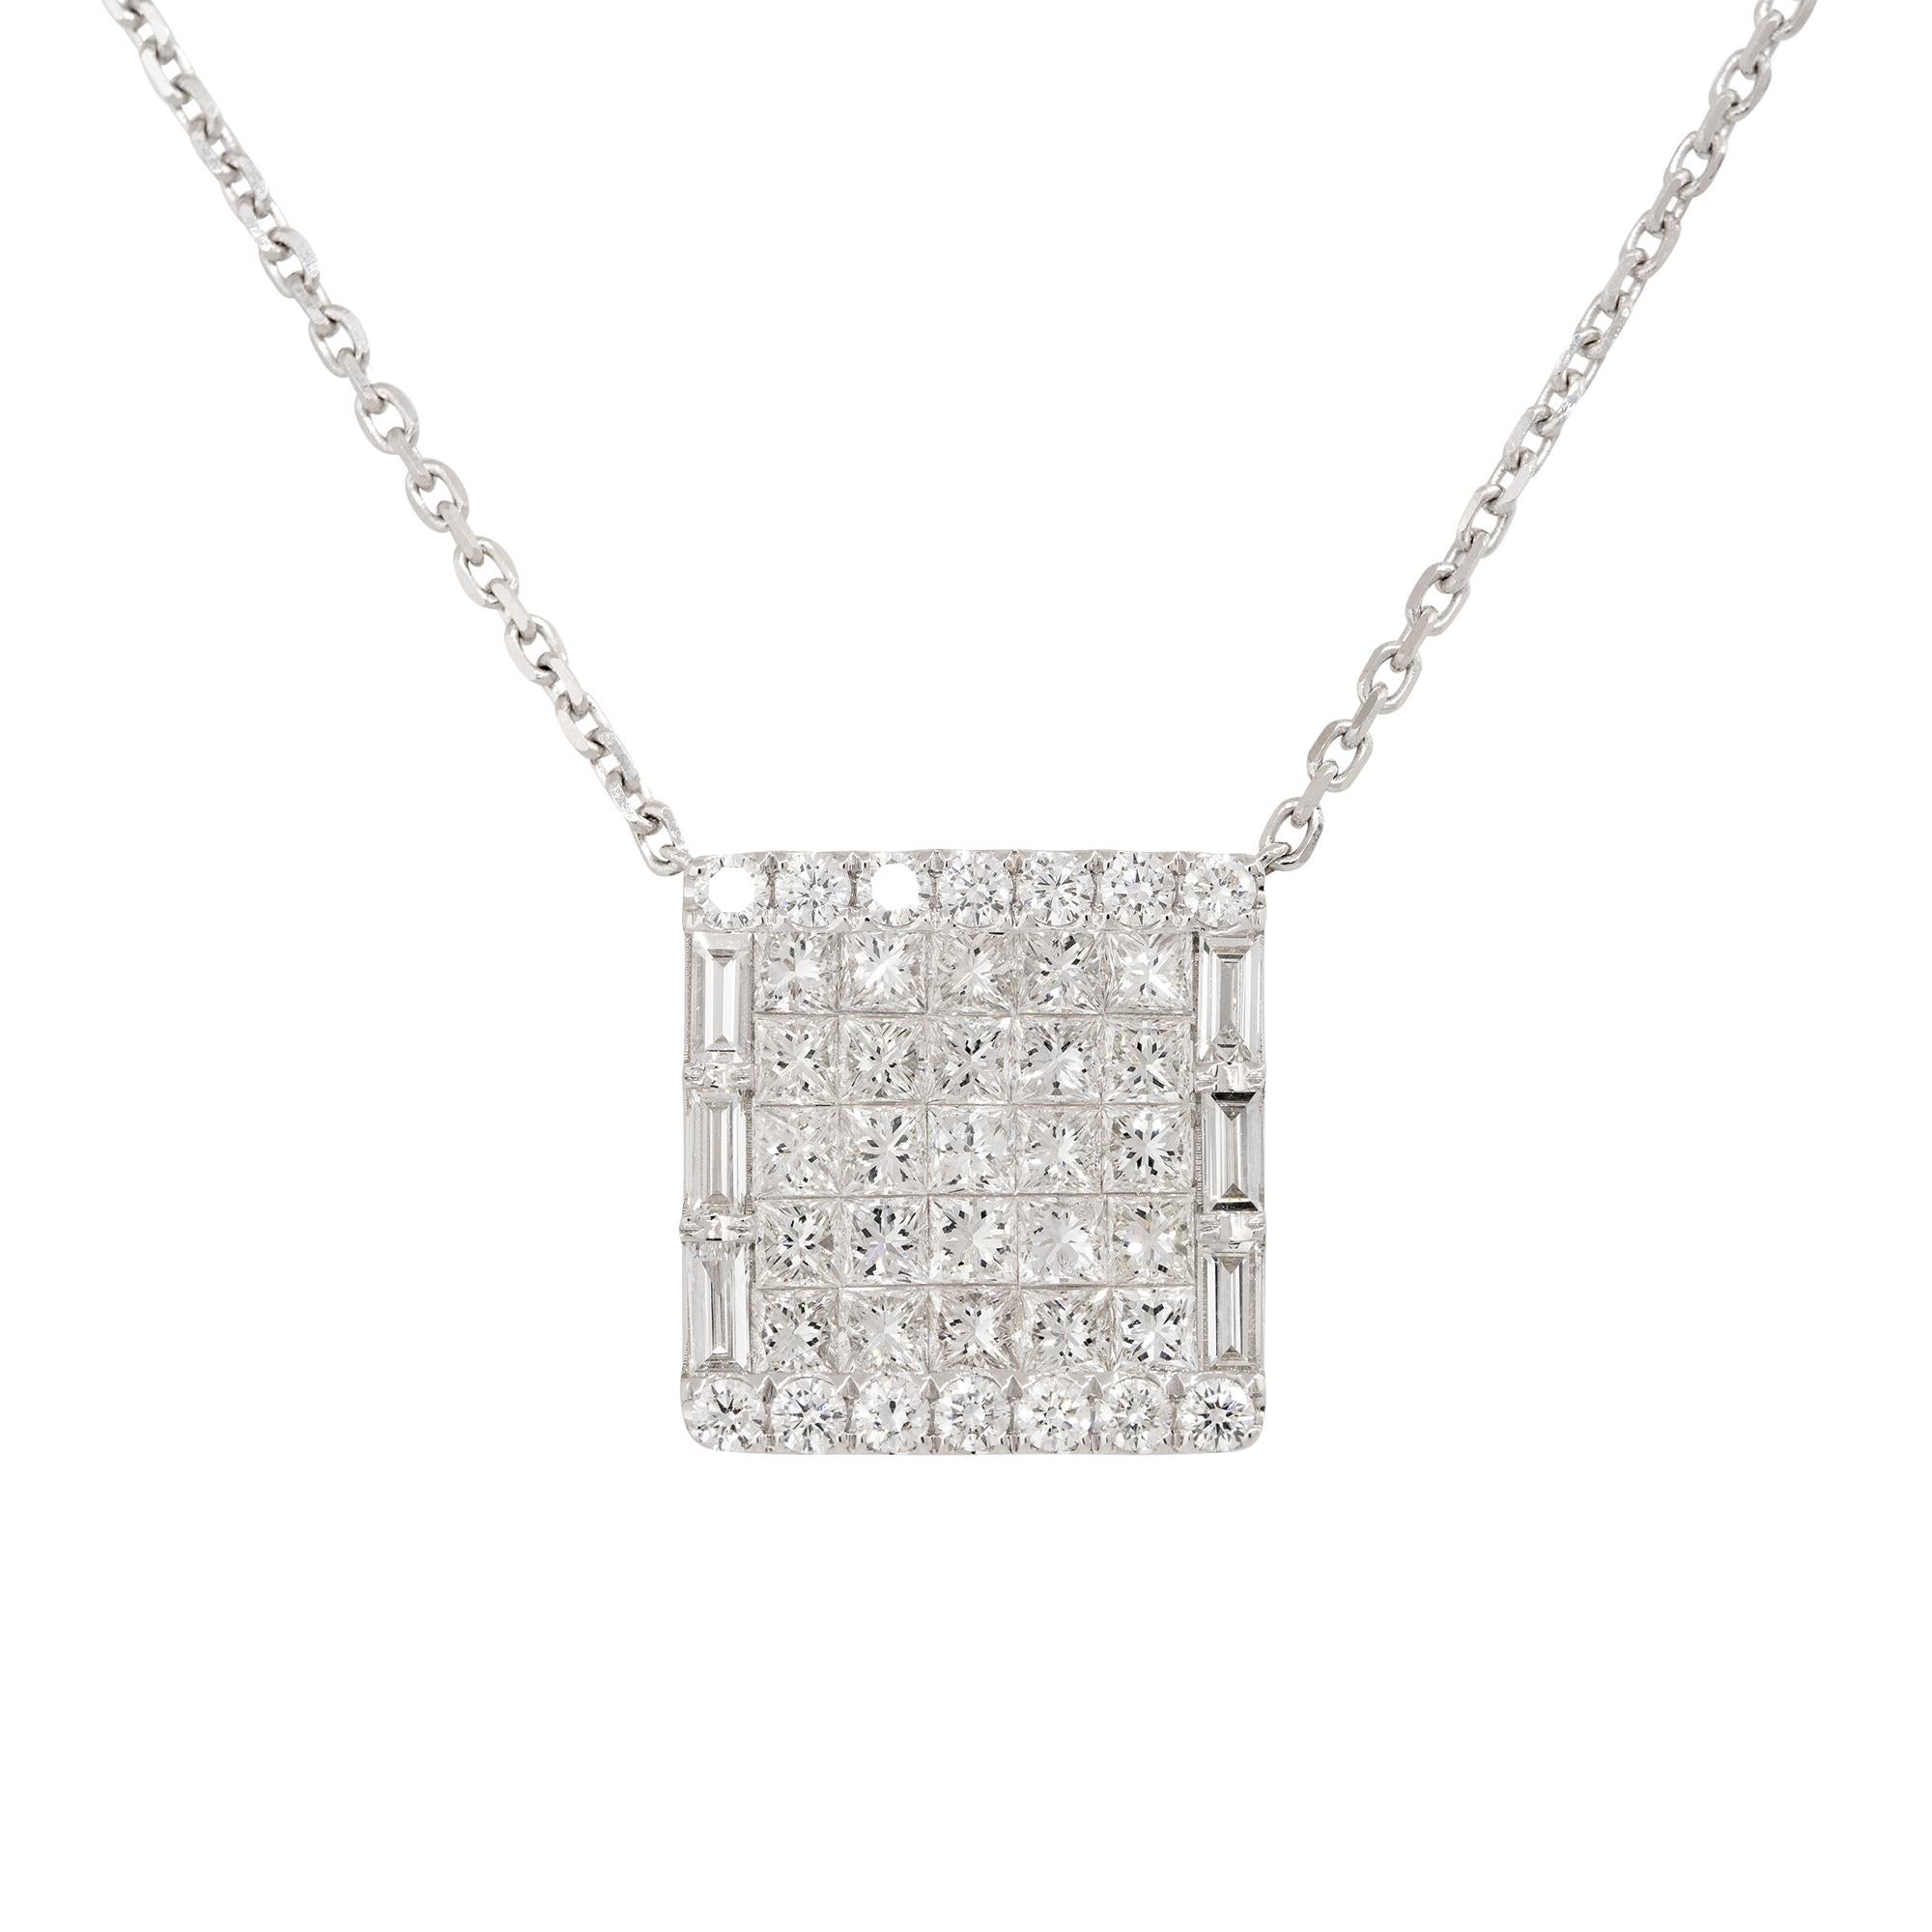 18k White Gold 4ctw Pave Diamond Rectangular Shape Pendant Necklace
Material: 18k White Gold
Diamond Details: There are approximately 4 carats of invisible set diamonds. There are Princess cut diamonds in the center of the pendant surrounded by